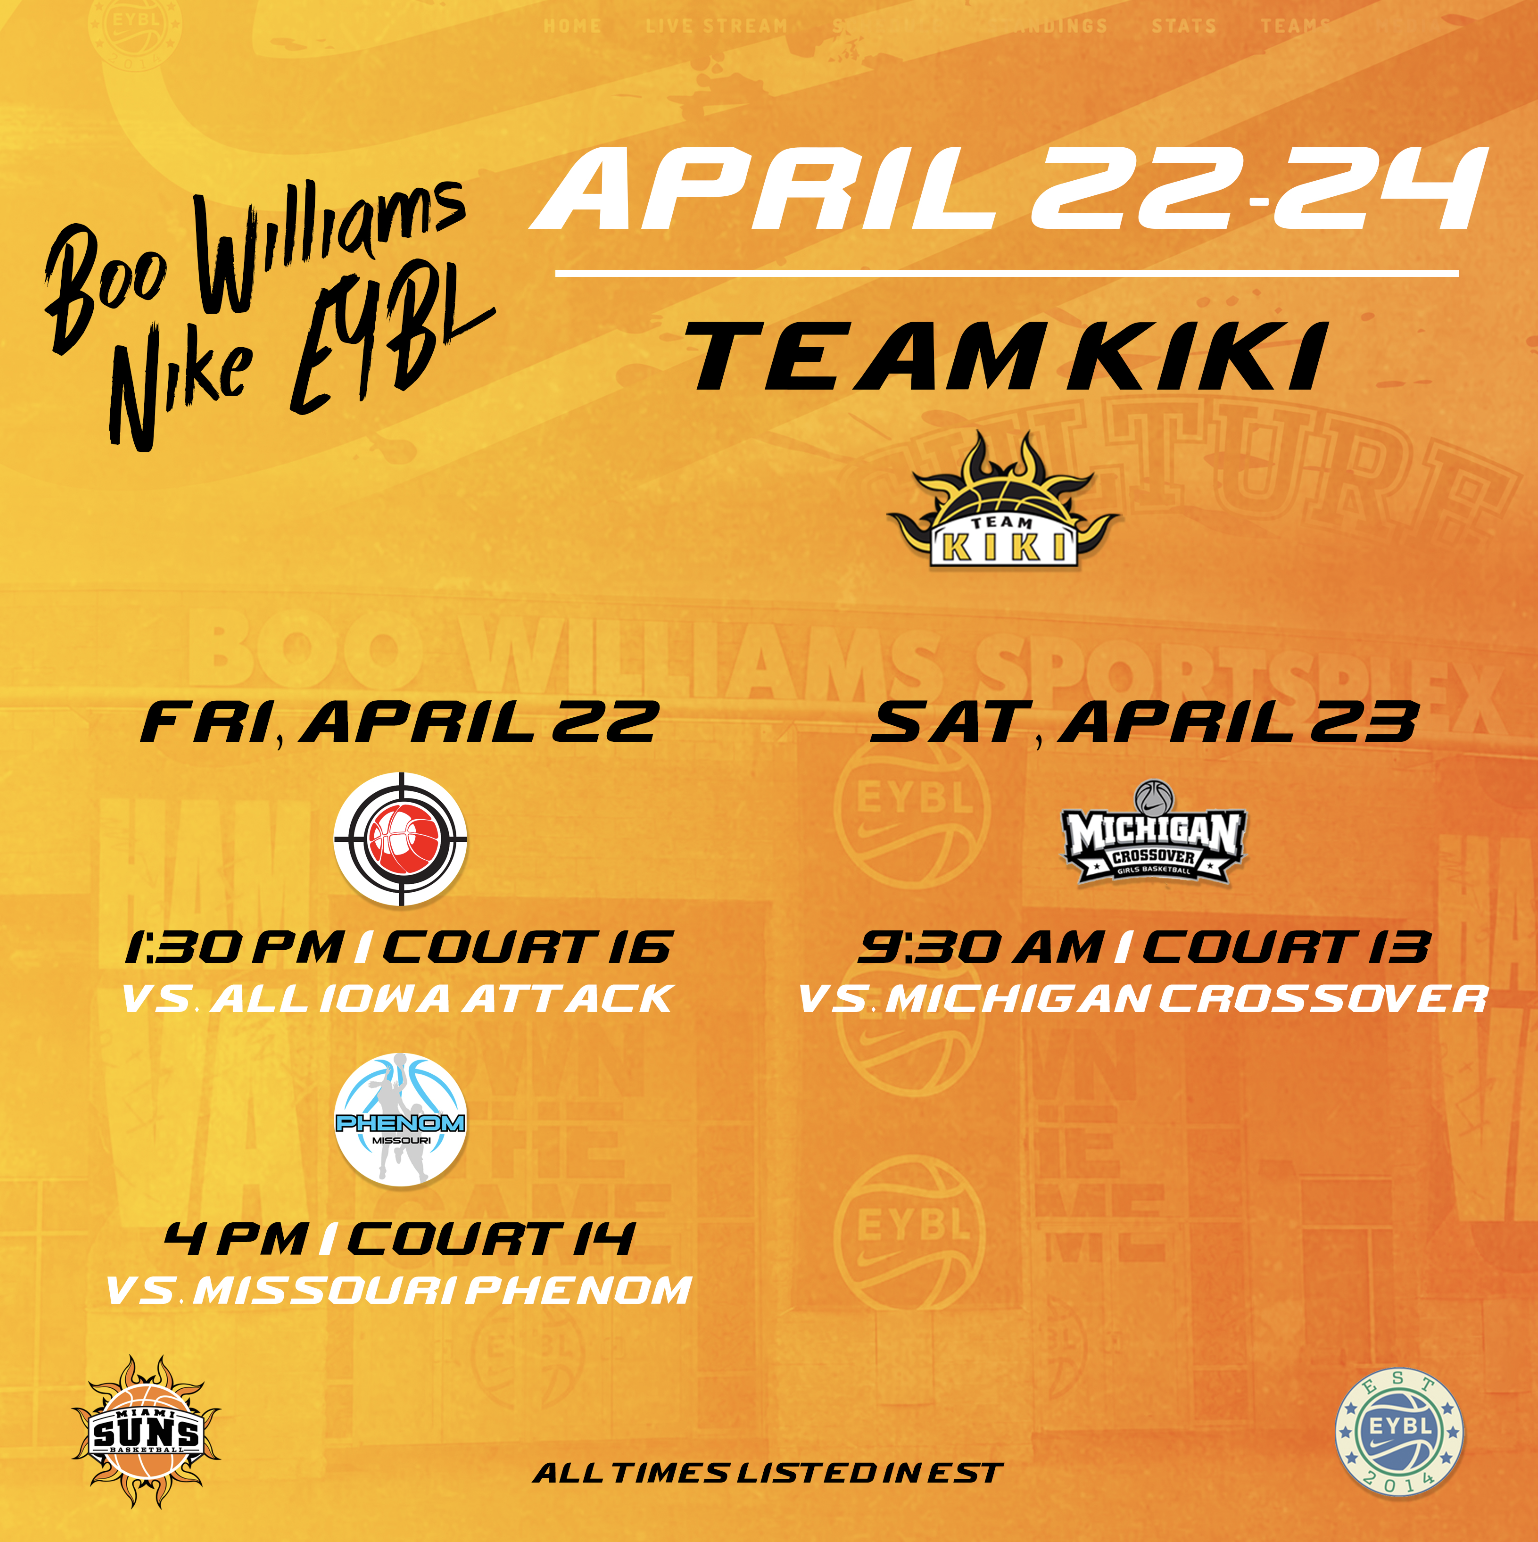 2022 Boo Williams Schedule Released: Suns Gold and Team Kiki